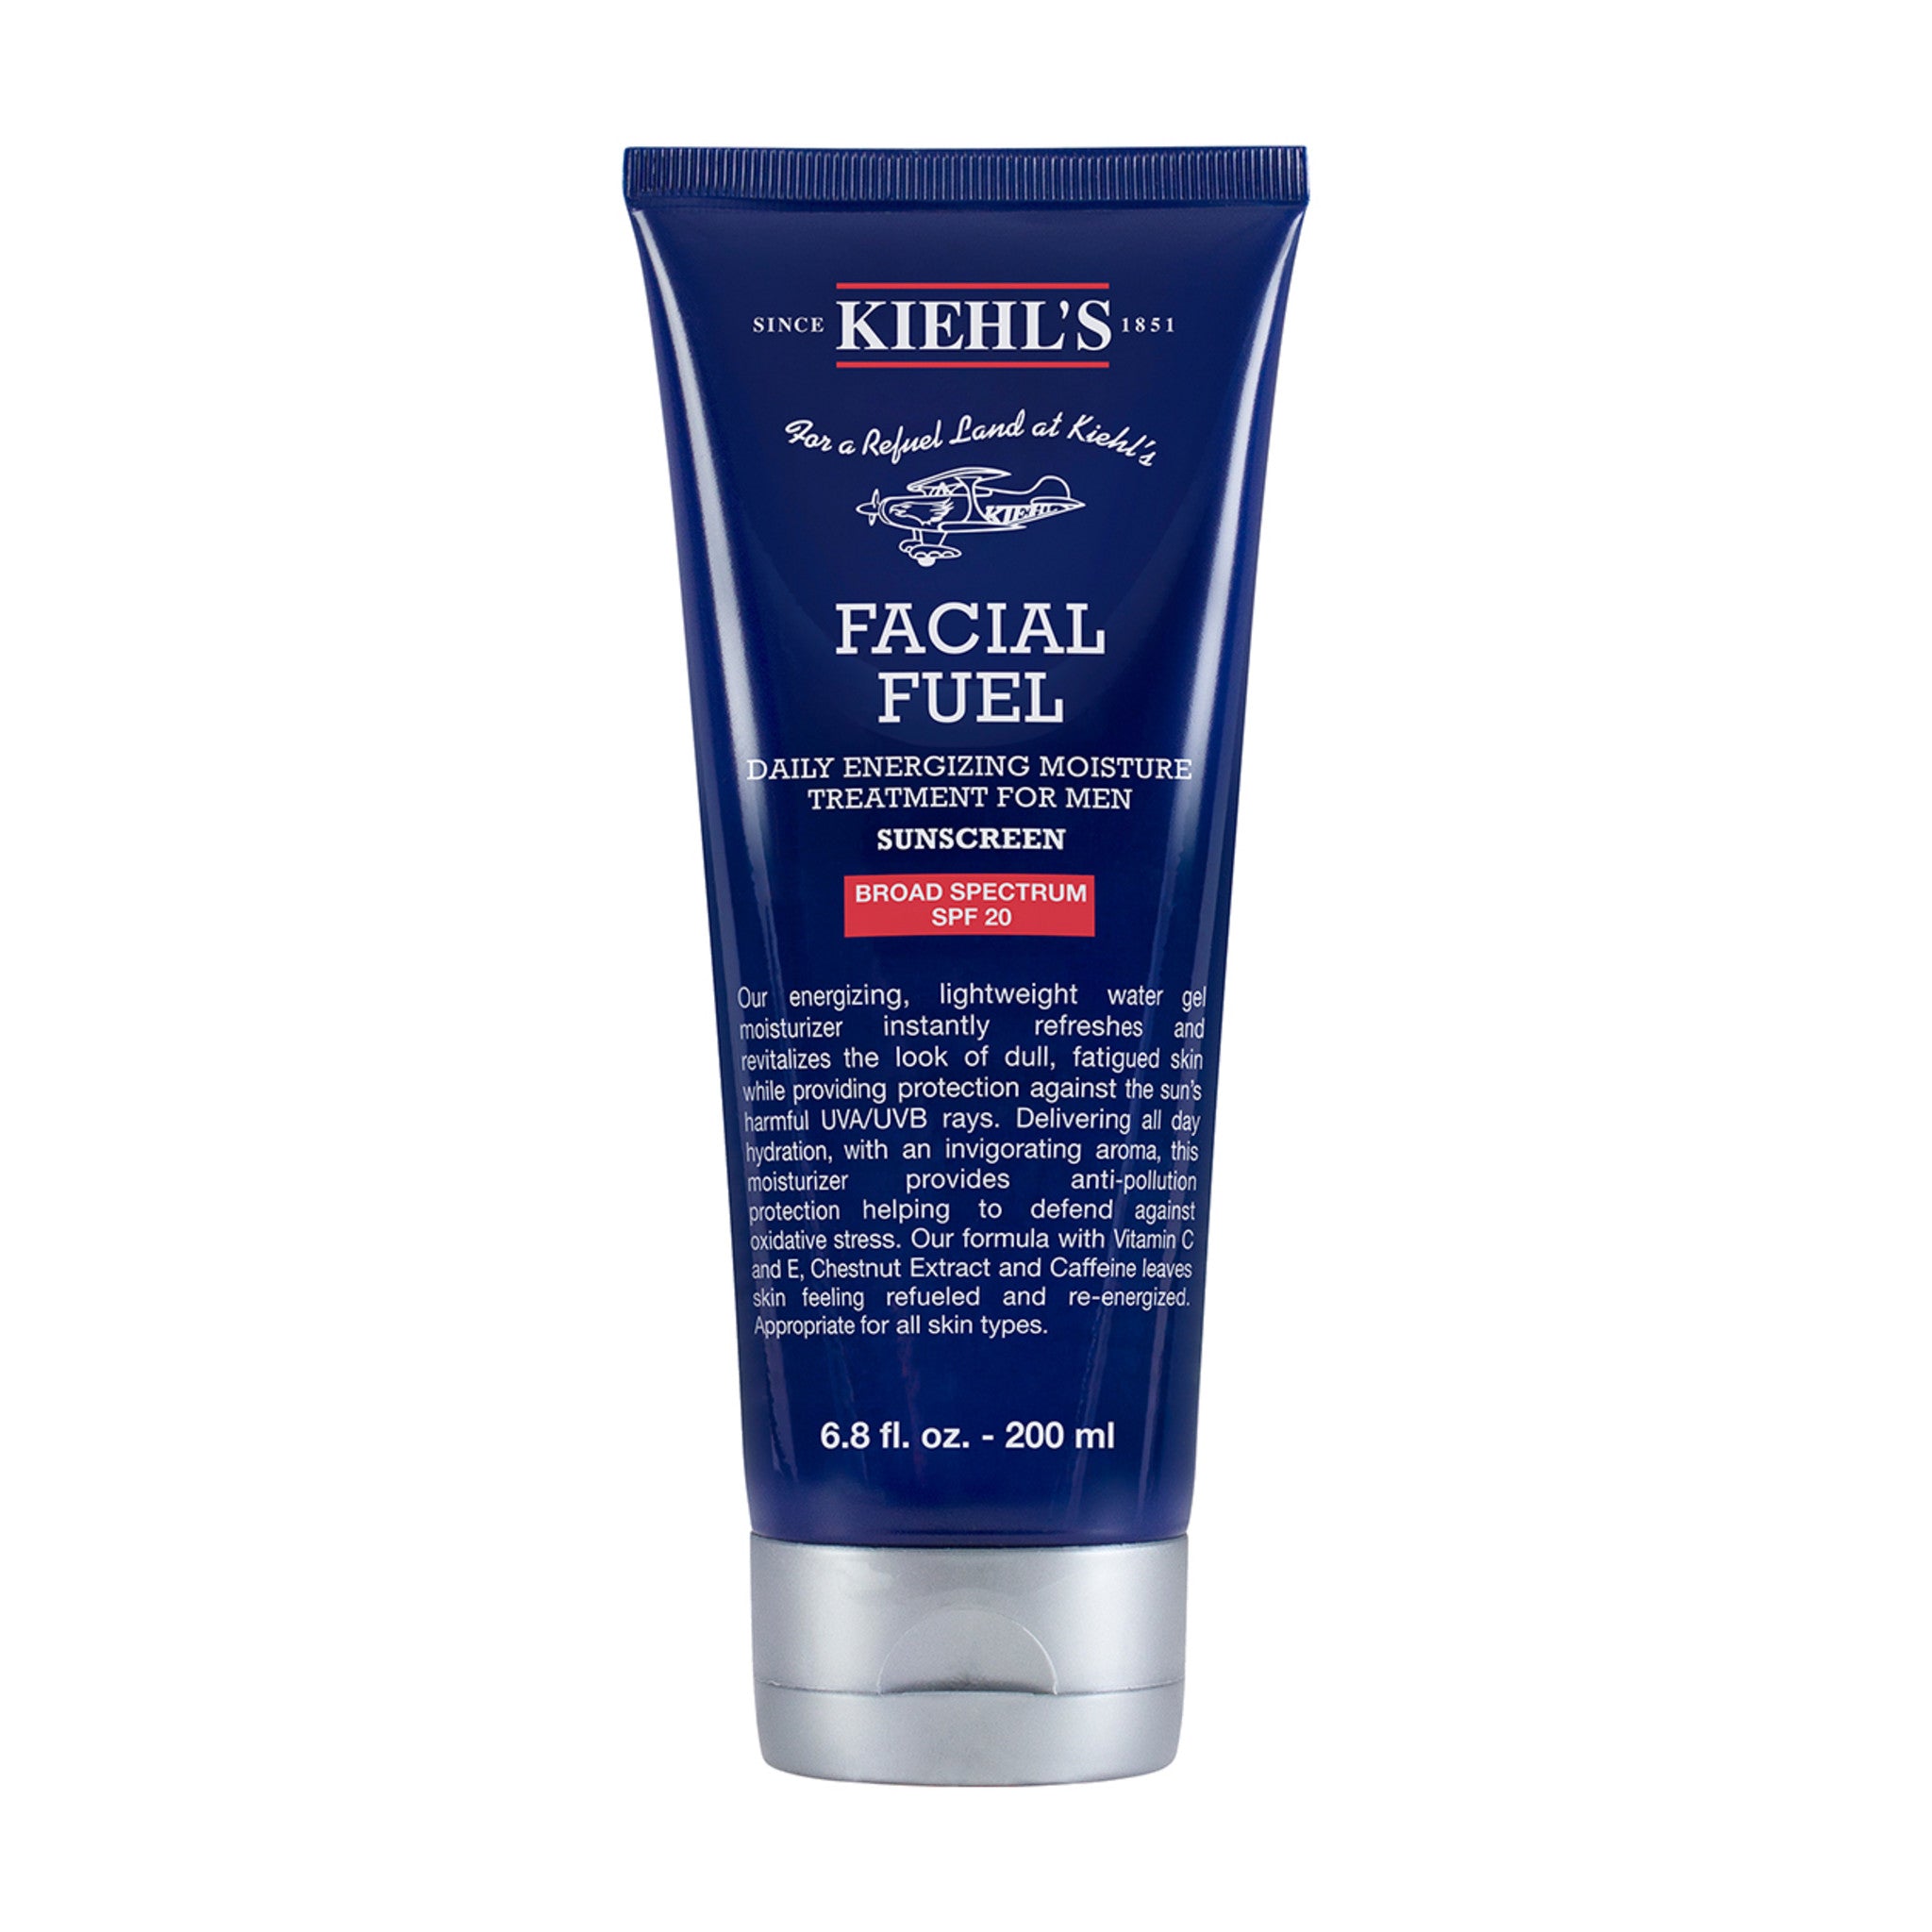 Kiehl's Since 1851 Facial Fuel Daily Energizing Moisture Treatment For Men Spf 20 Size variant: 6.8 oz main image.